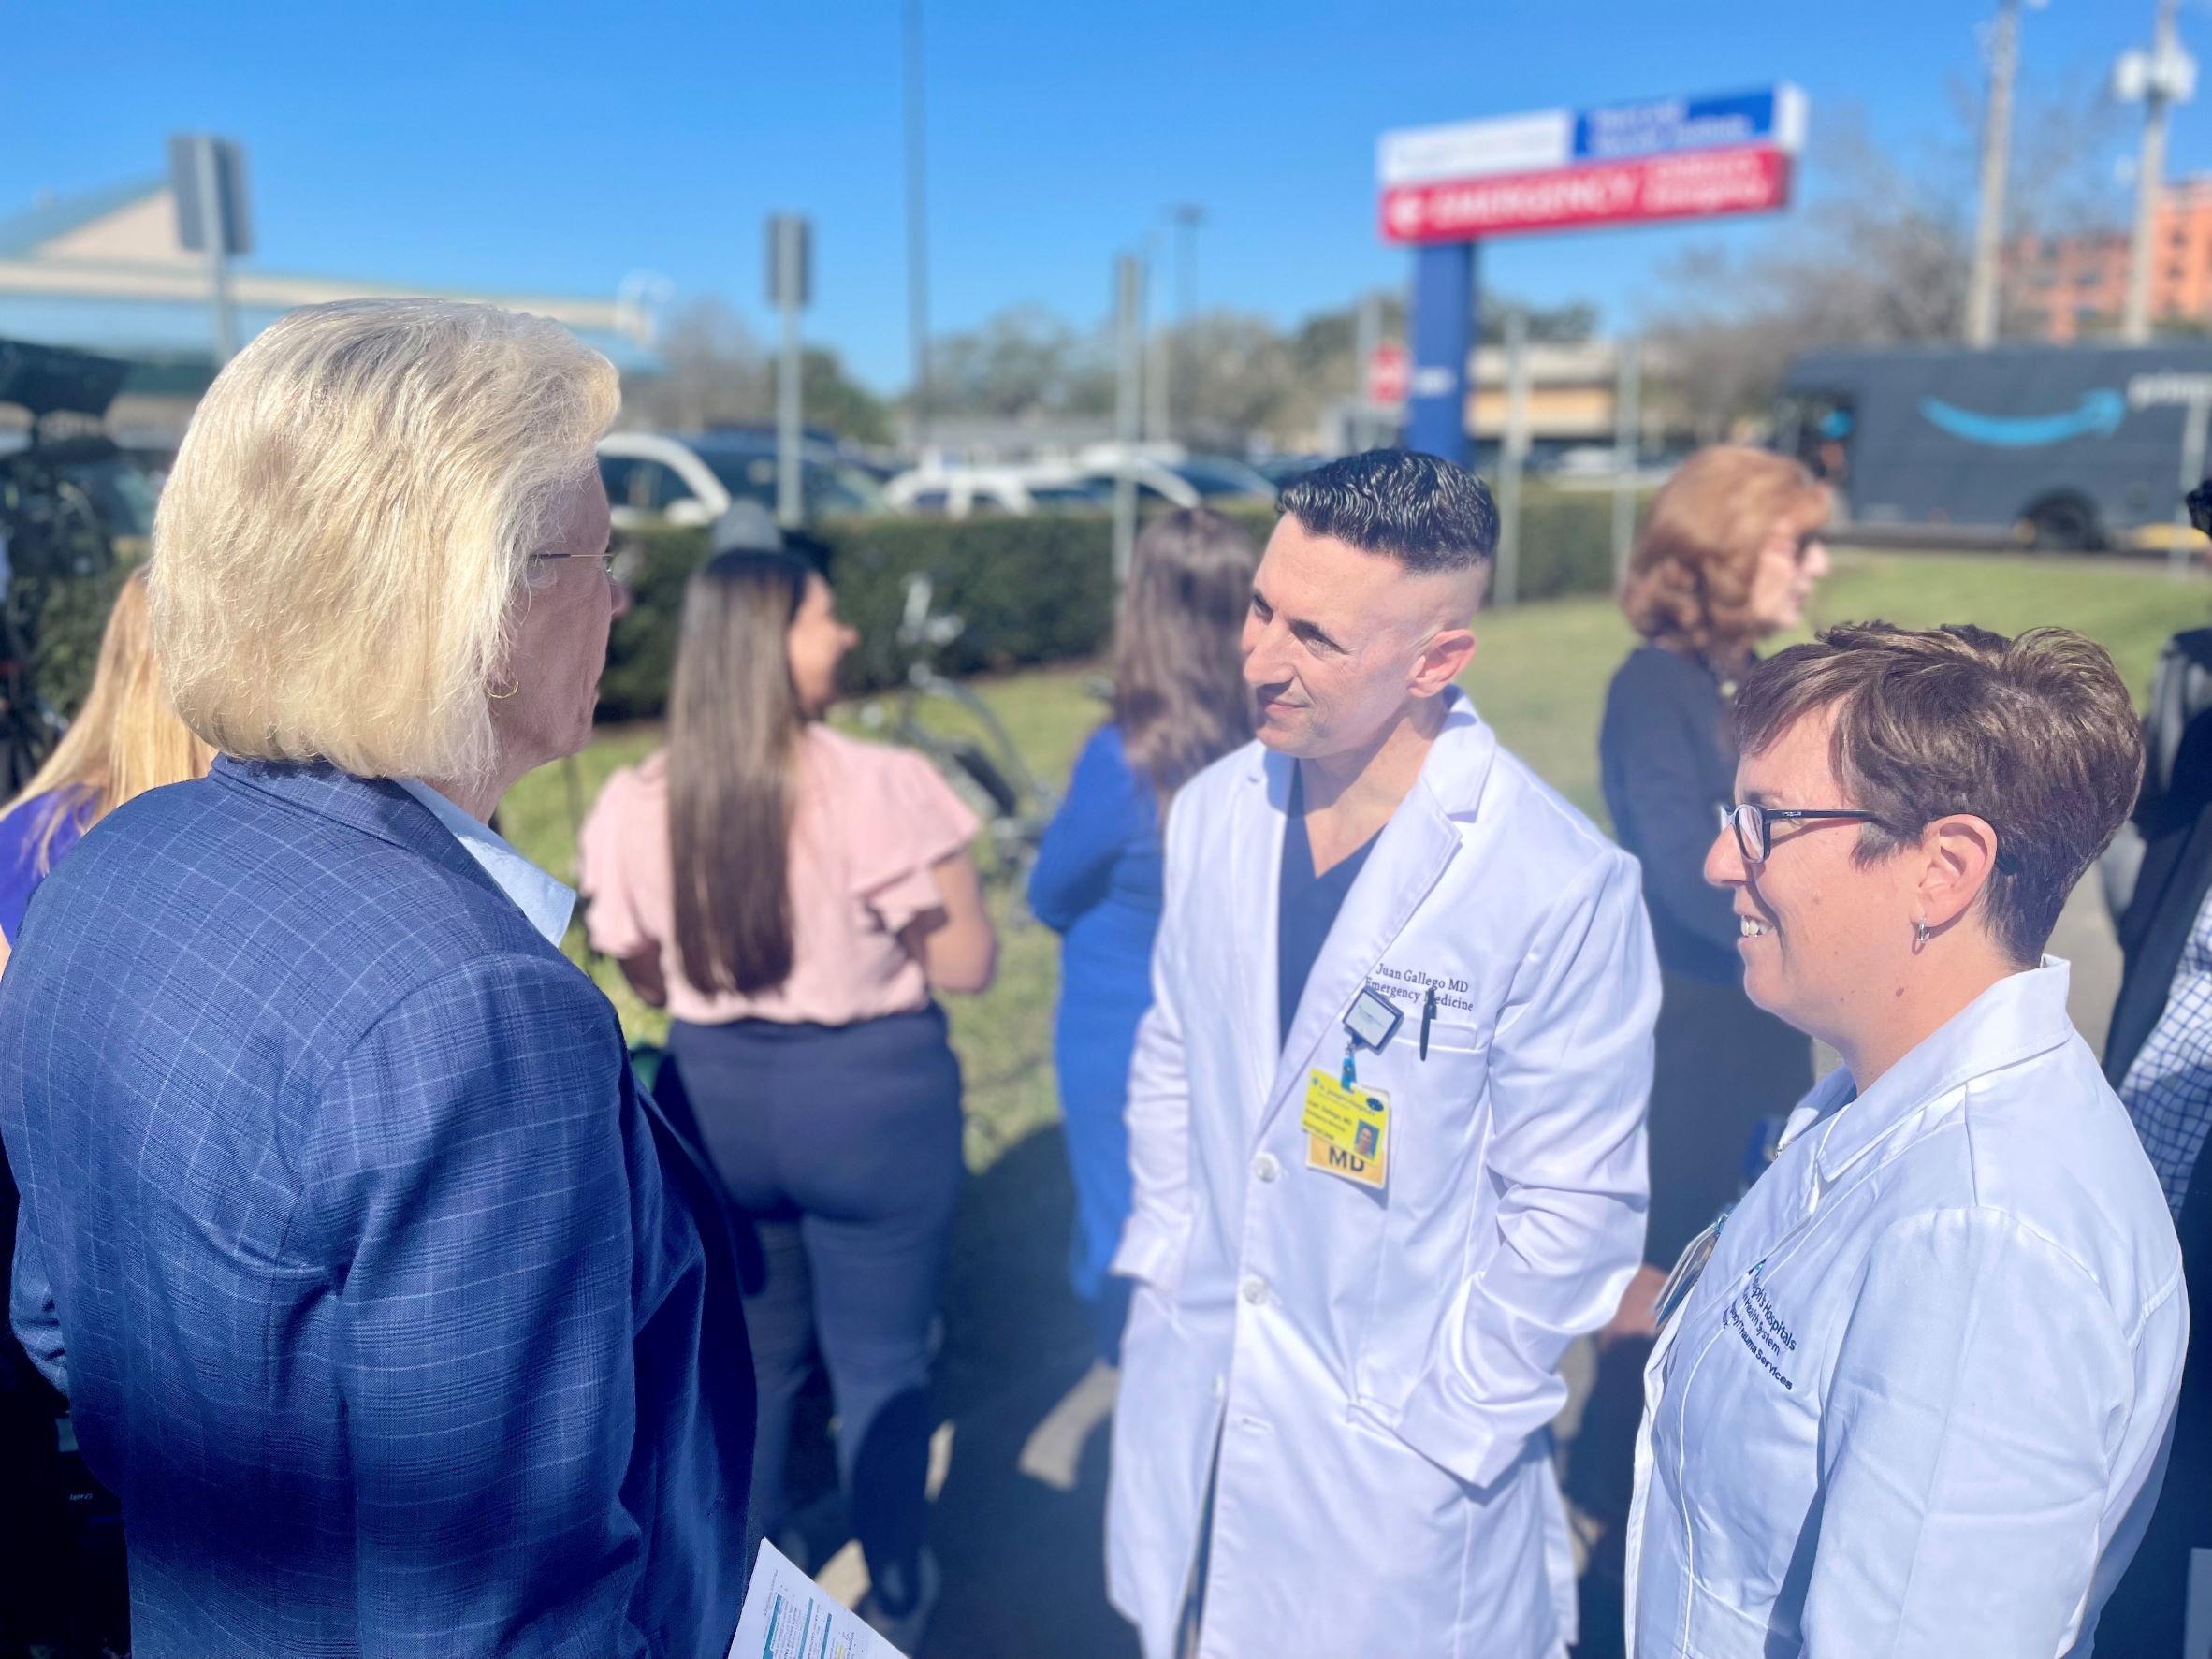 Dr. Juan Gallego, Medical Director and Emergency Department Chief with St. Joseph’s Hospital, speaks with Mayor Castor about the importance of upcoming road safety improvements along Habana Avenue near the hospital. Habana Avenue is along Tampa's High-Injury Network.